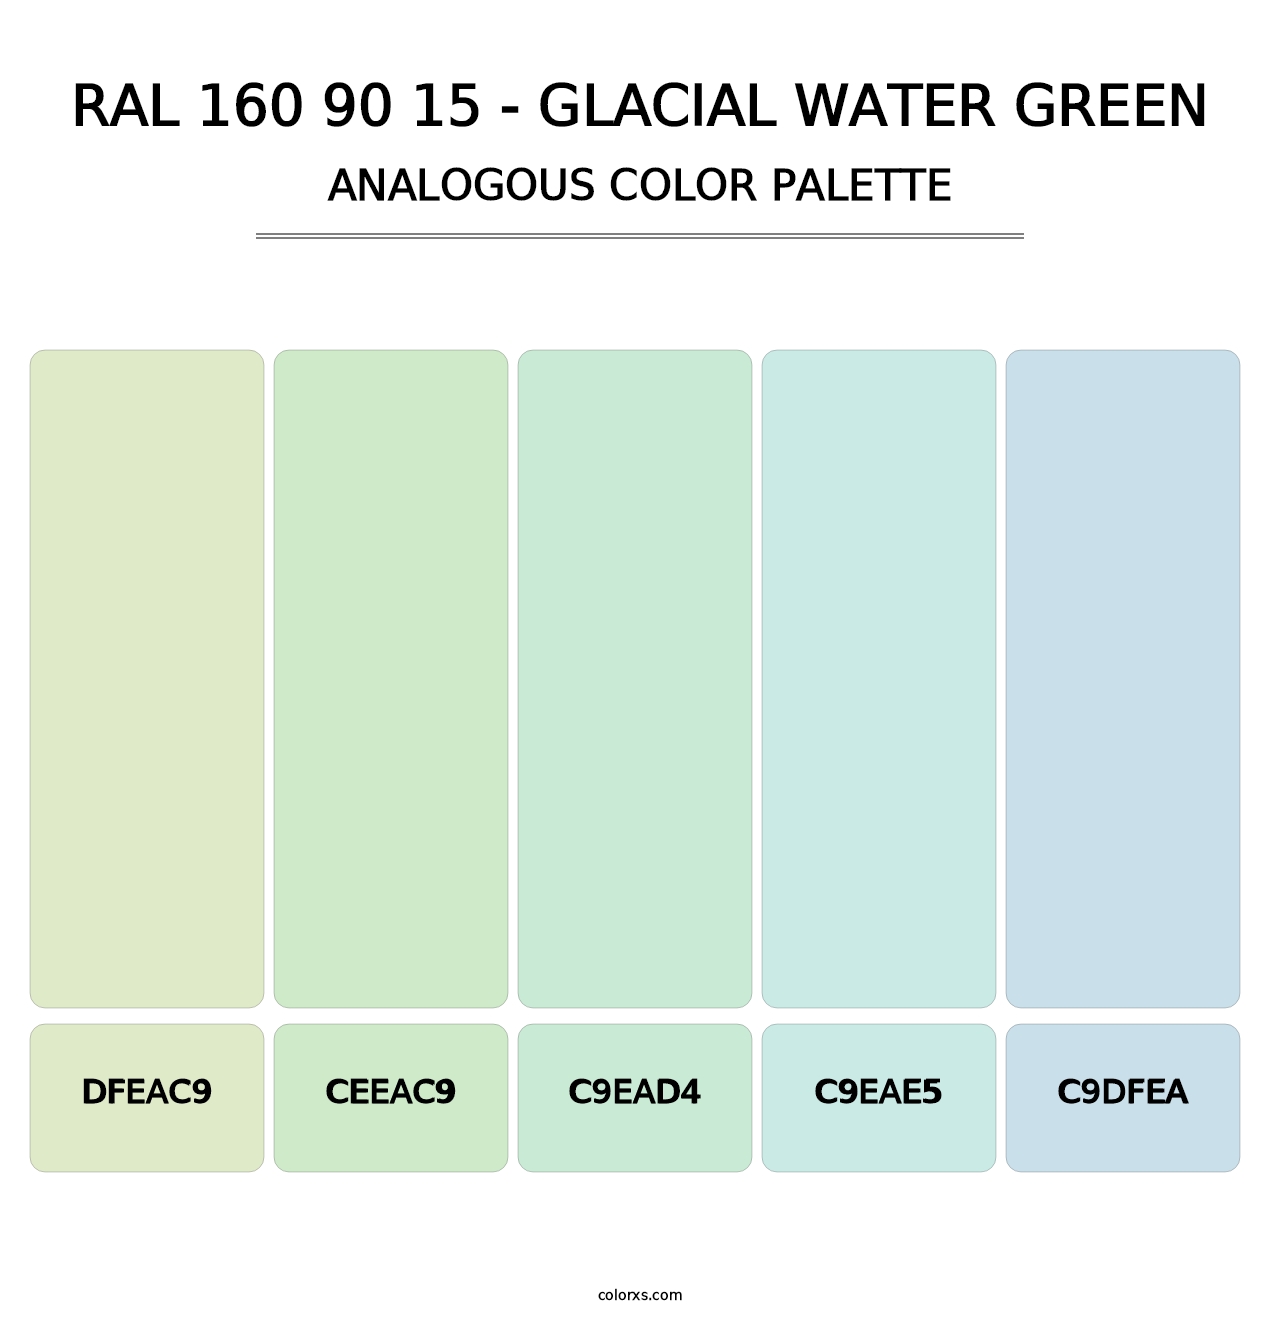 RAL 160 90 15 - Glacial Water Green - Analogous Color Palette